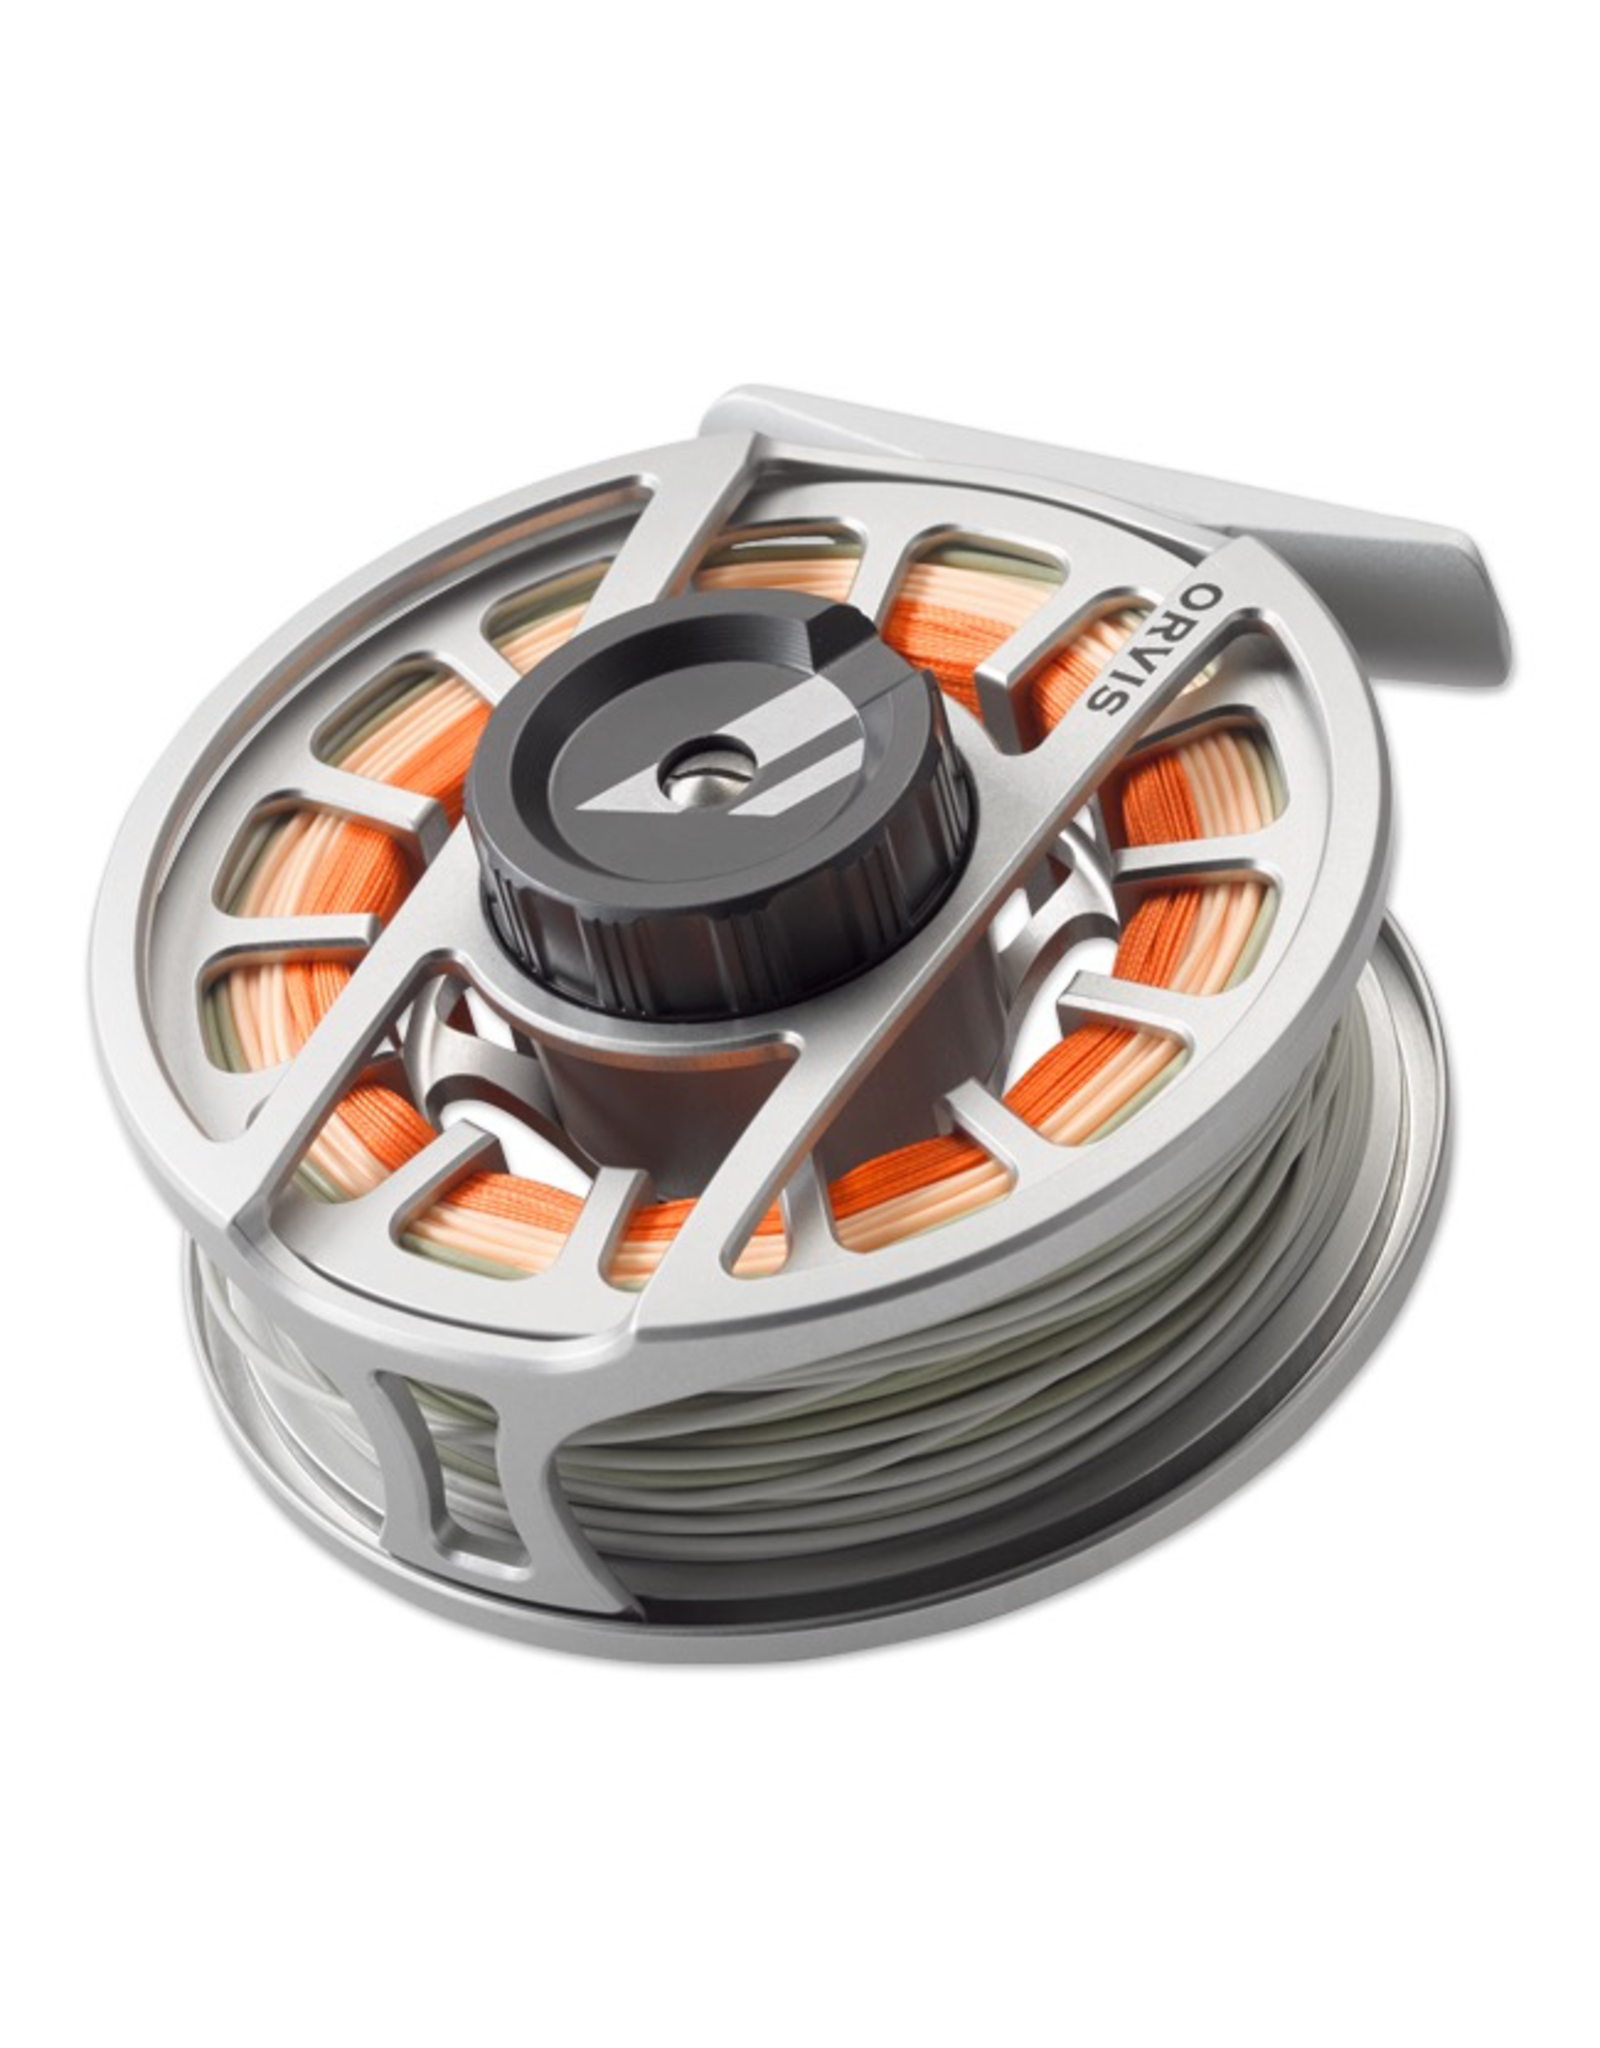 NEW ORVIS Hydros III Reel (Silver) 5-7wt - Royal Gorge Anglers